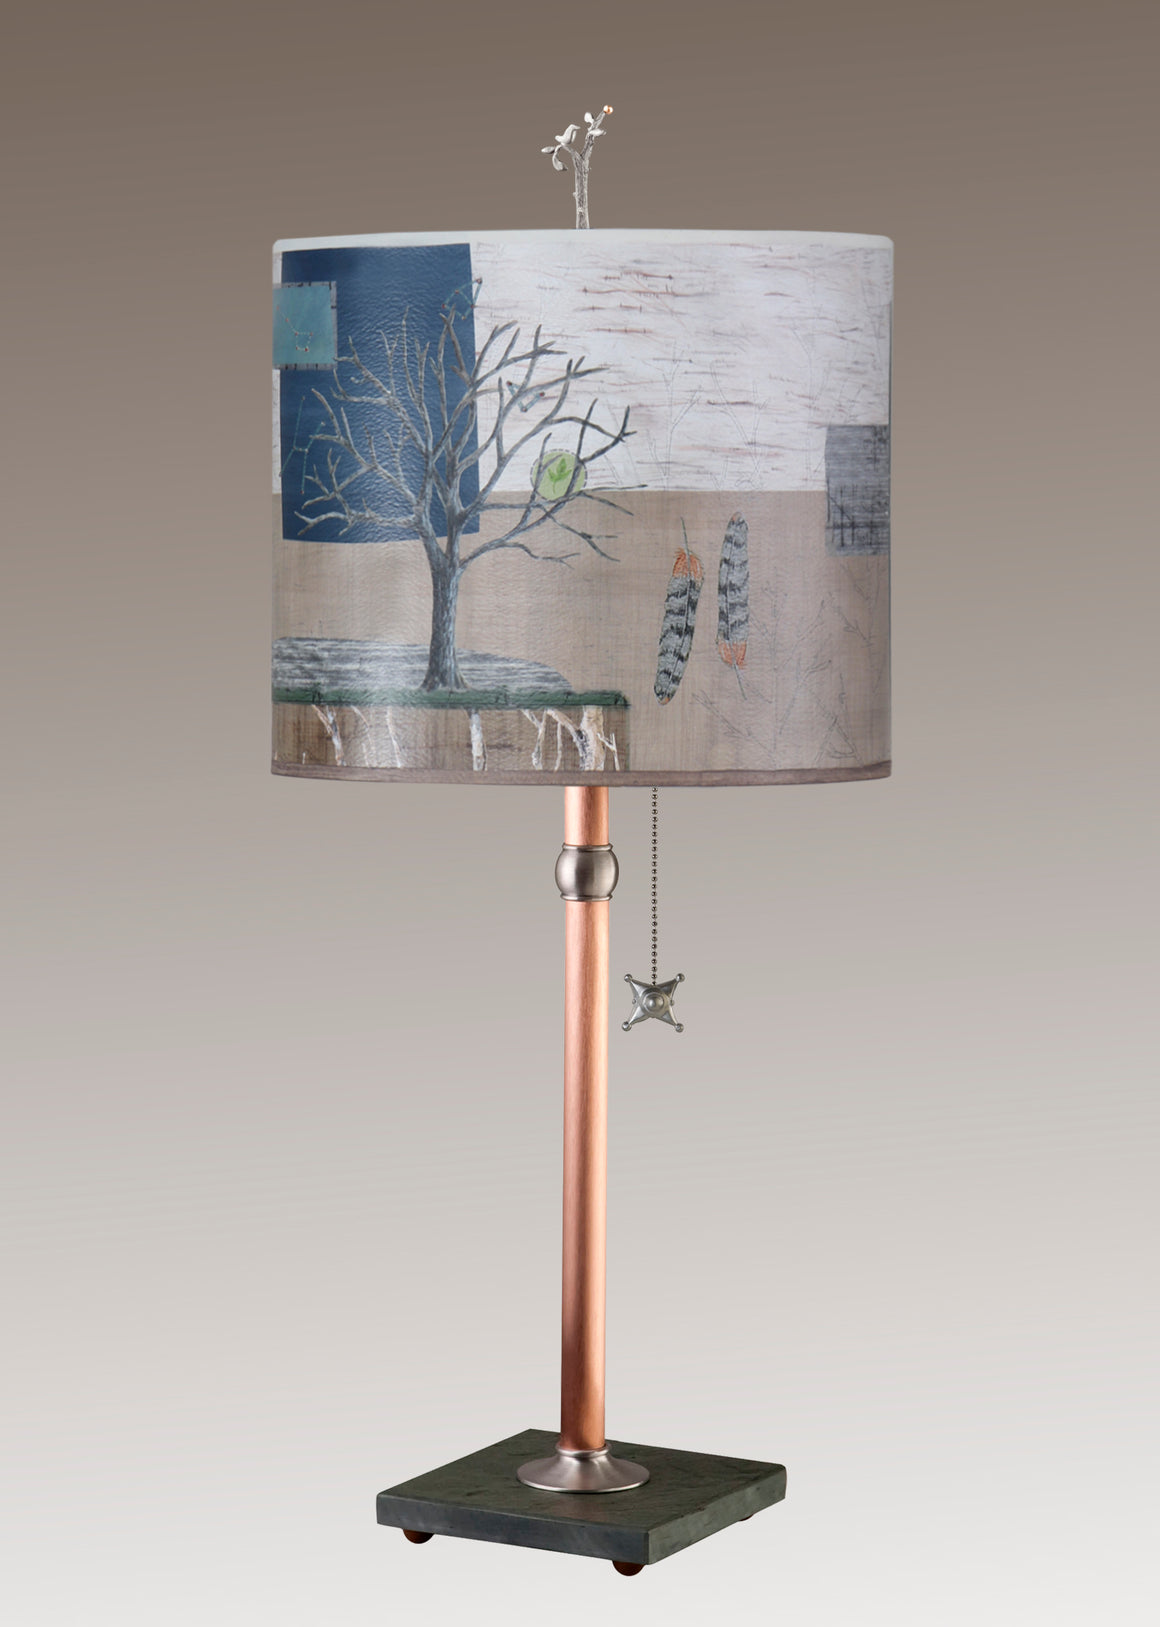 Copper Table Lamp with Large Oval Shade in Wander in Drift